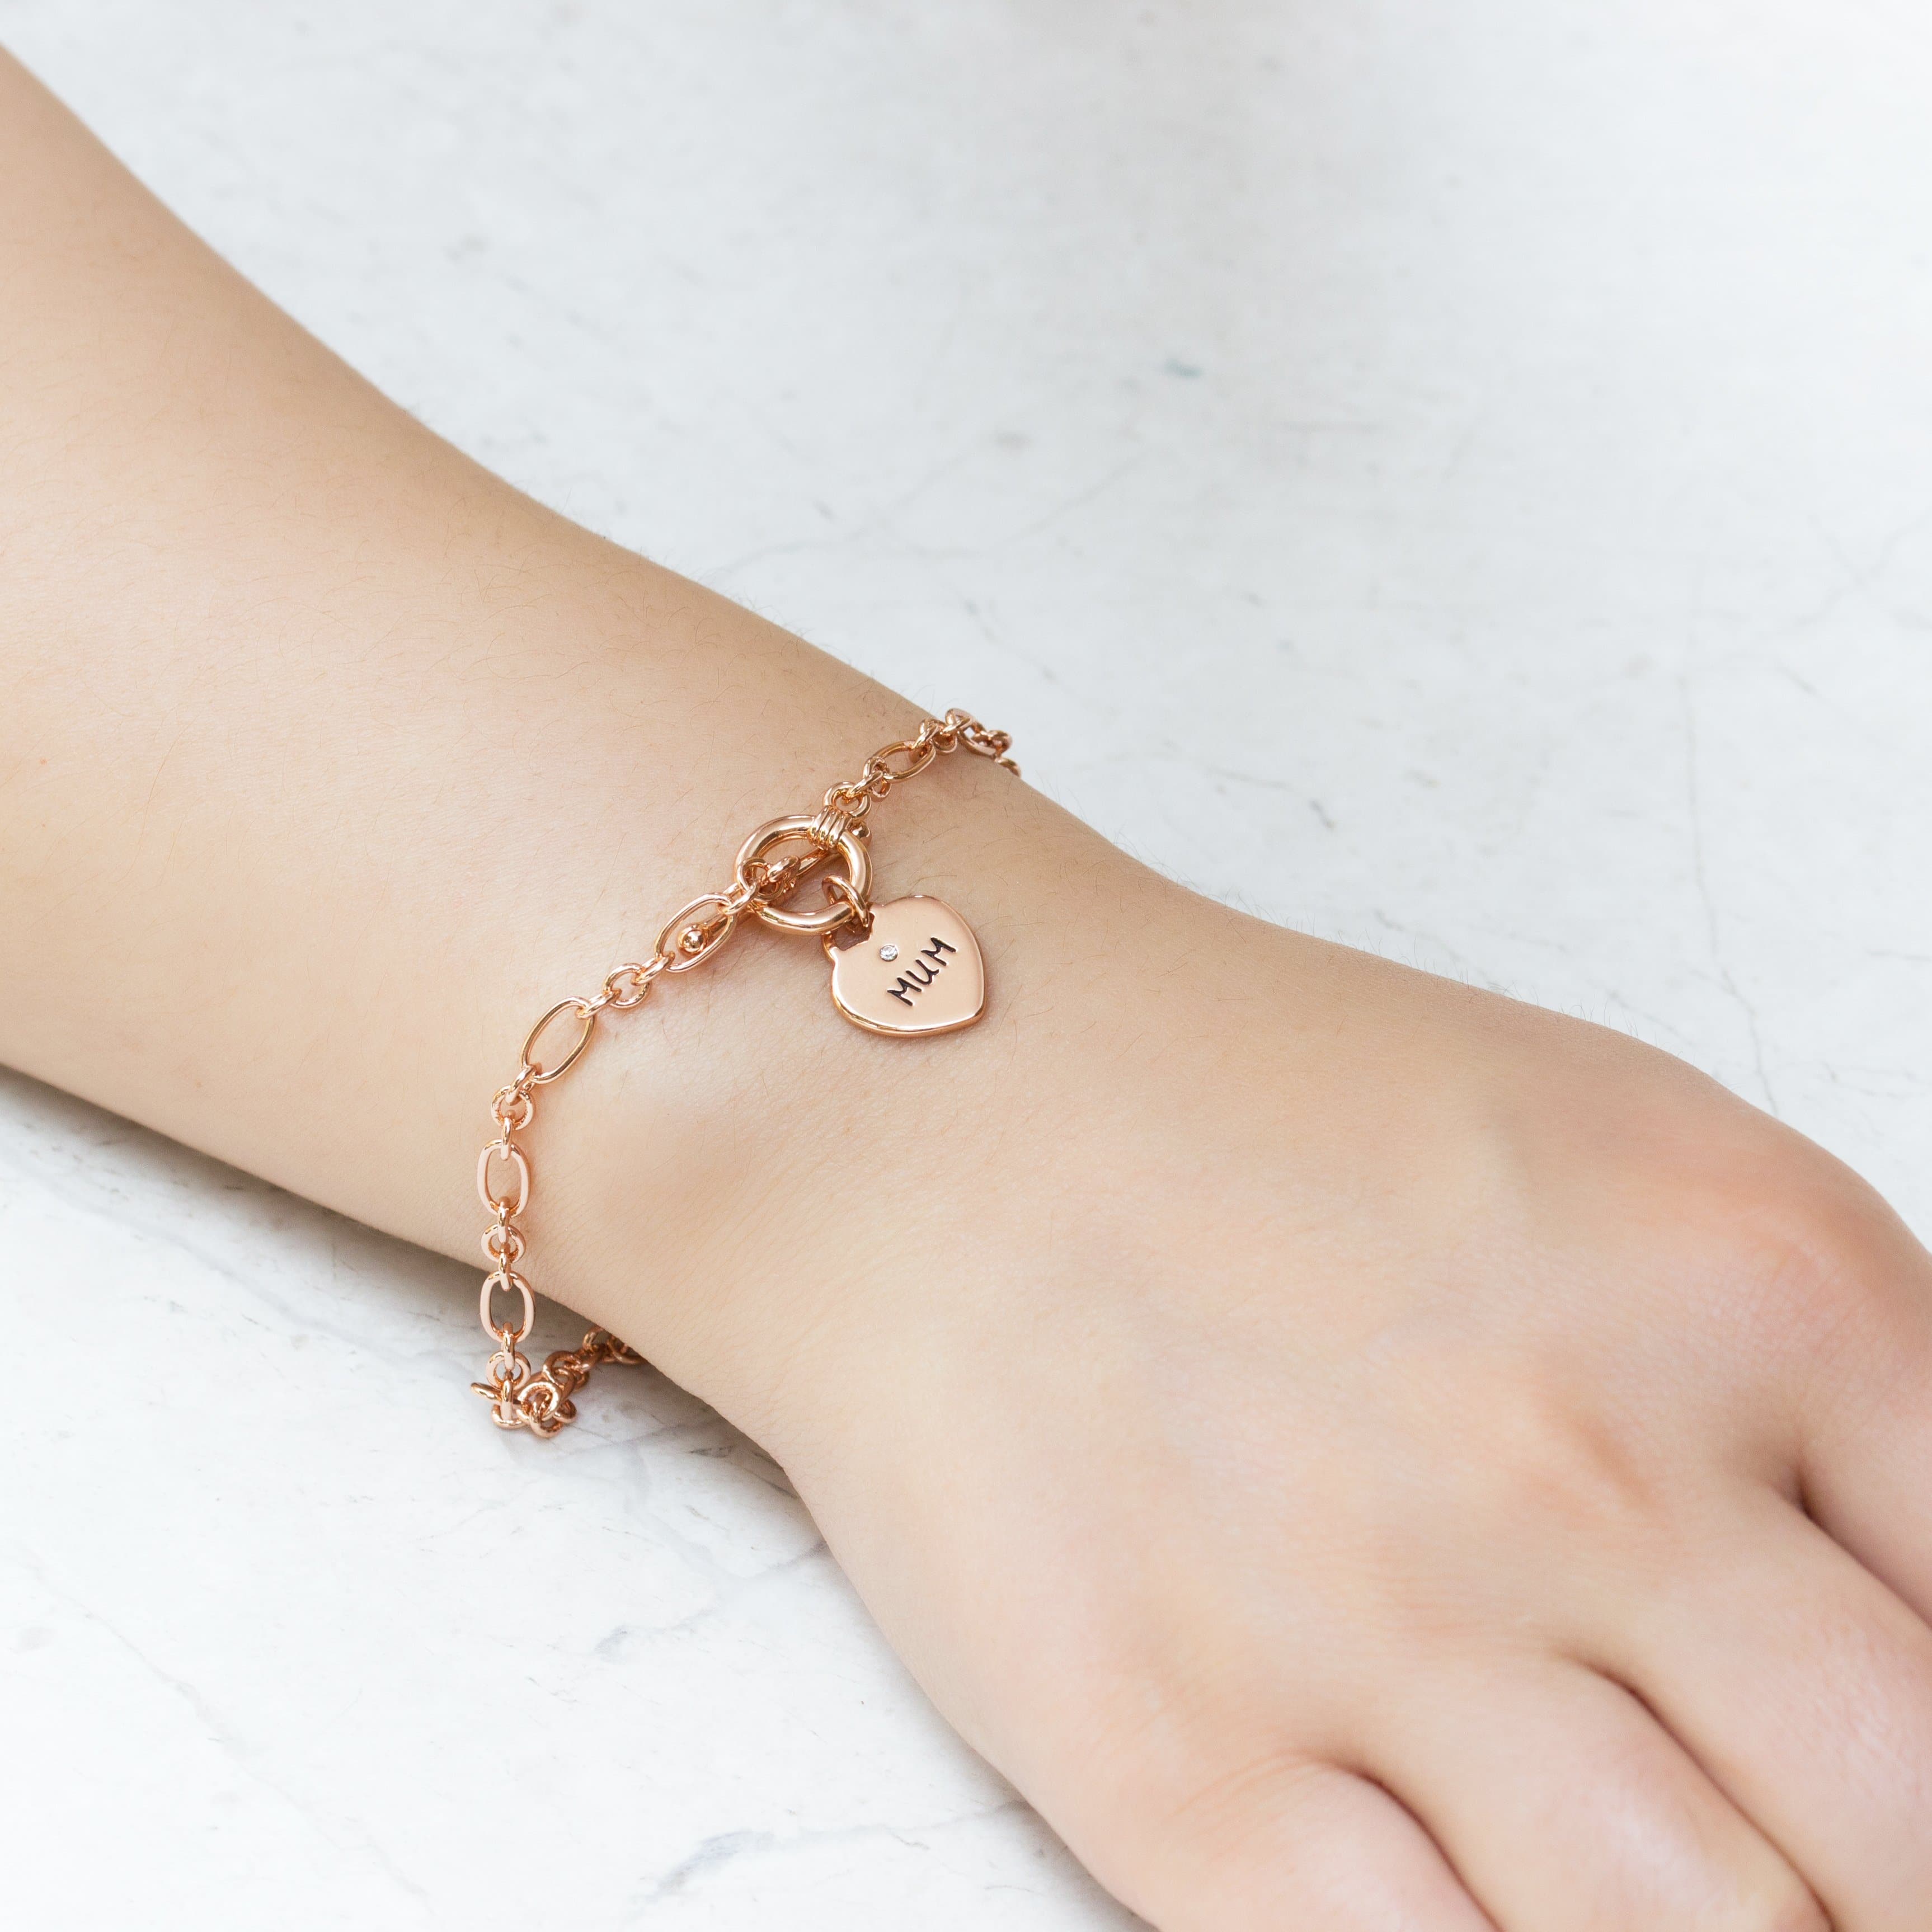 Rose Gold Plated Mum Charm Bracelet Created with Zircondia® Crystals